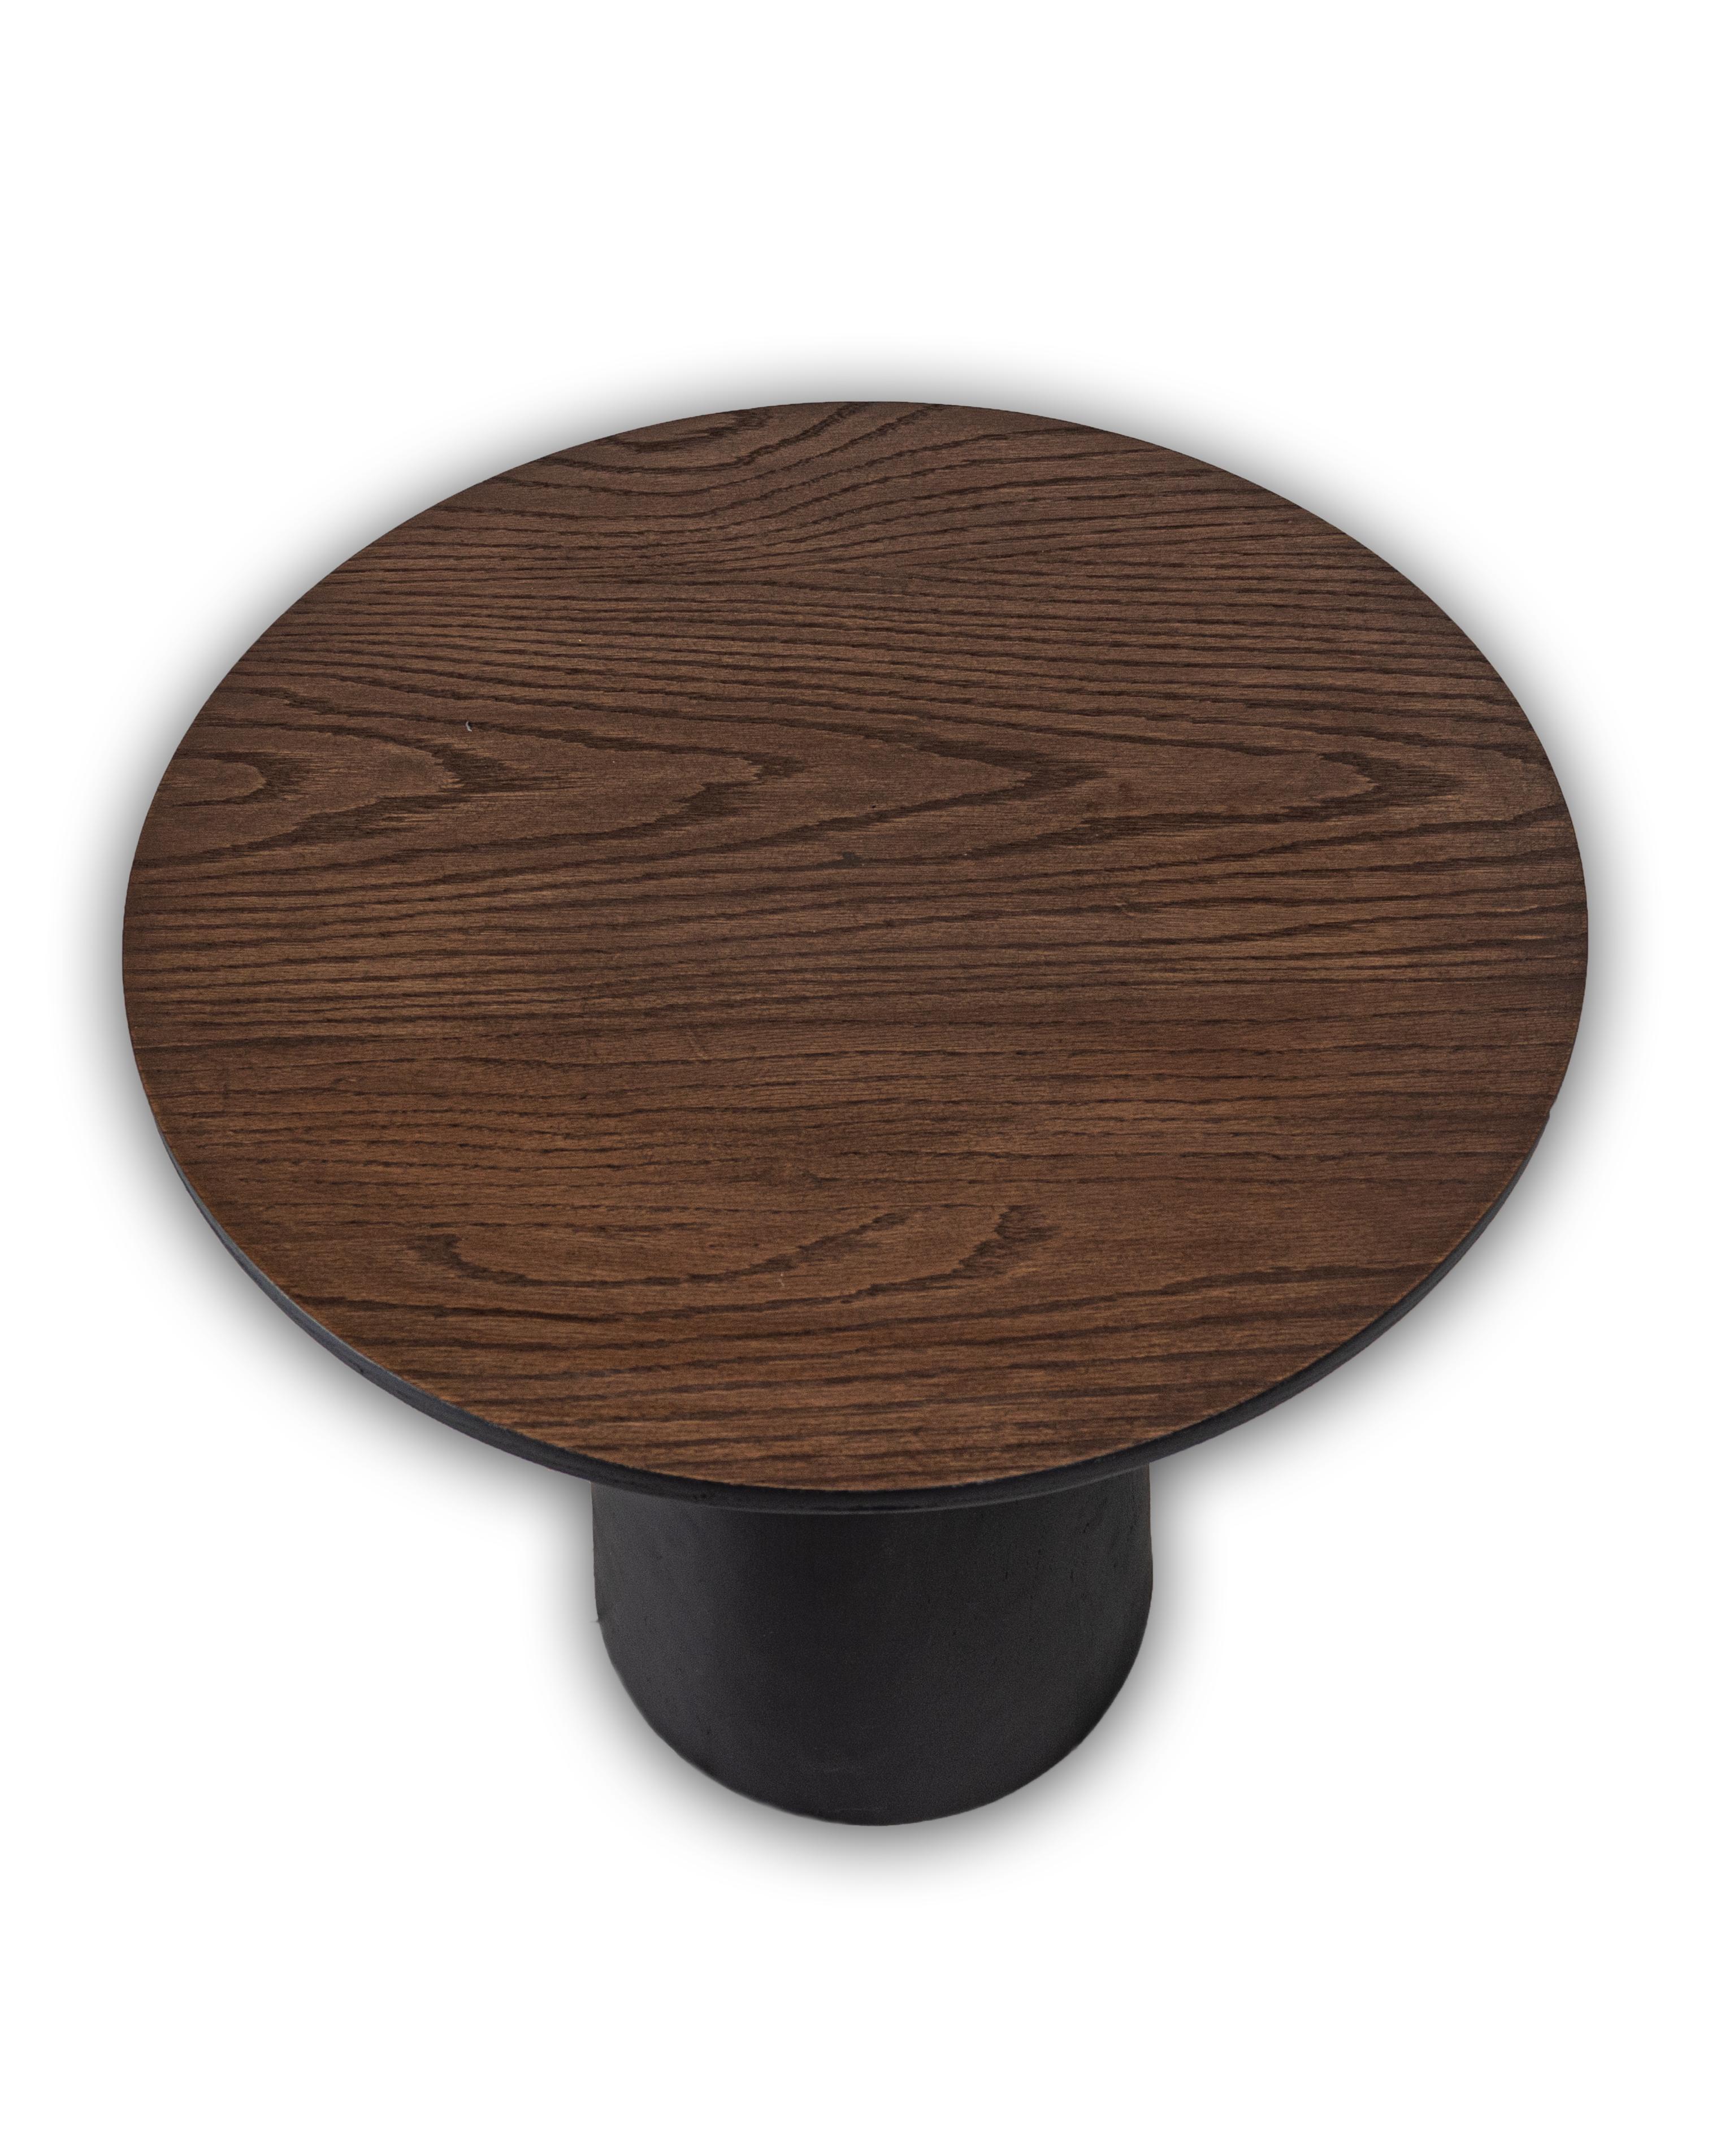 Ebonized elm modern end table

Sourced from our trade partners in Europe. One of a kind piece.